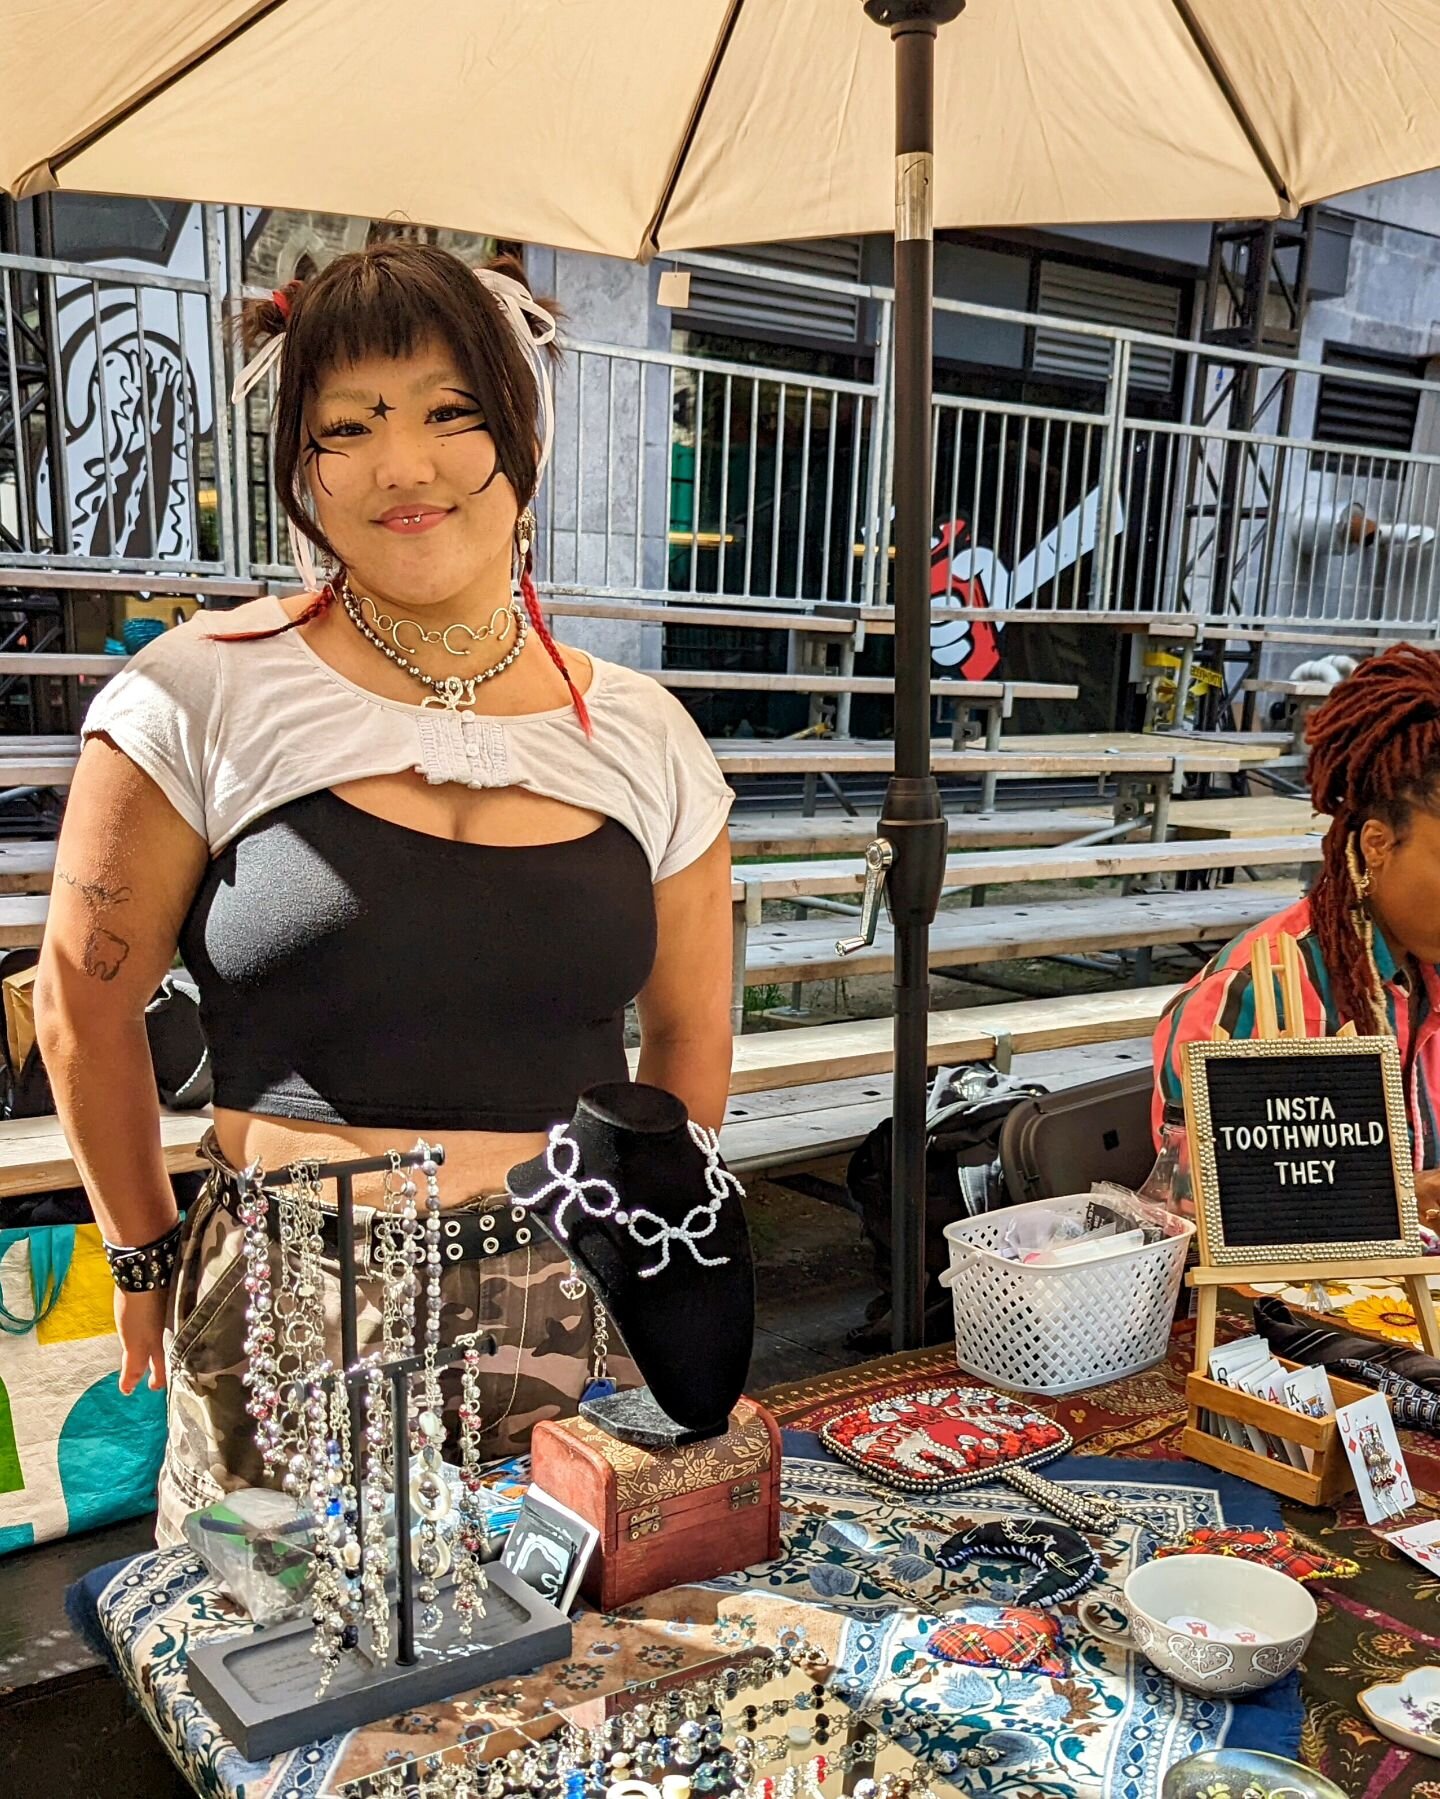 We have the cutest vendors!
Look at those smiles and those gorgeous tables✨💖☀️

That could be you 👀
Our upcoming event is a market and open mic! Vendor applications are open and the link is in our bio.

Applications close: October 7th 
Cozy: Autumn